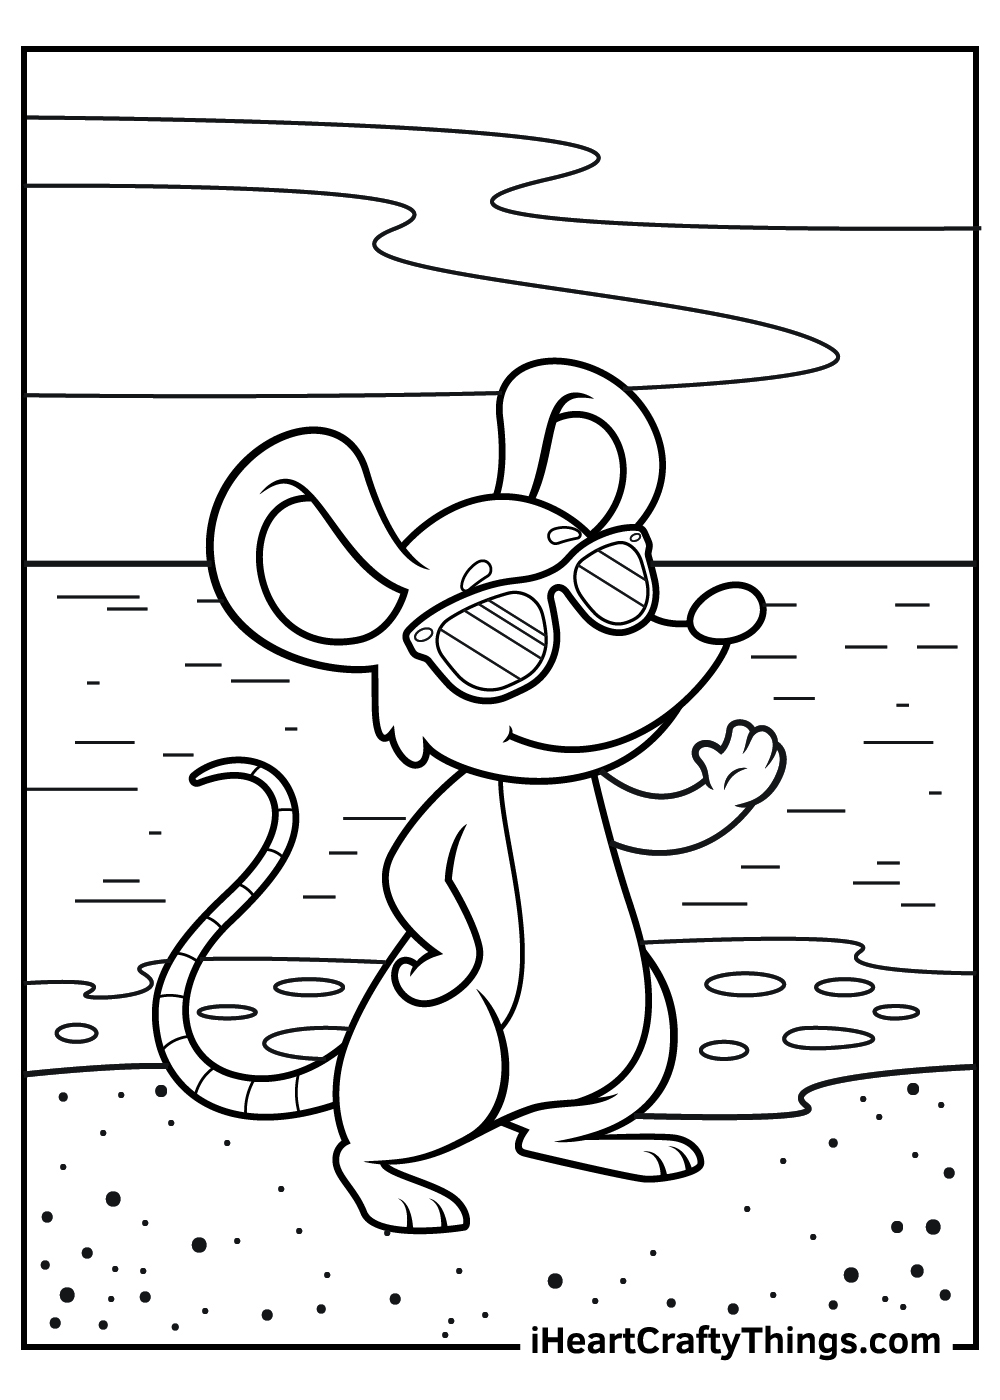 Mouse Coloring Pages Updated 20